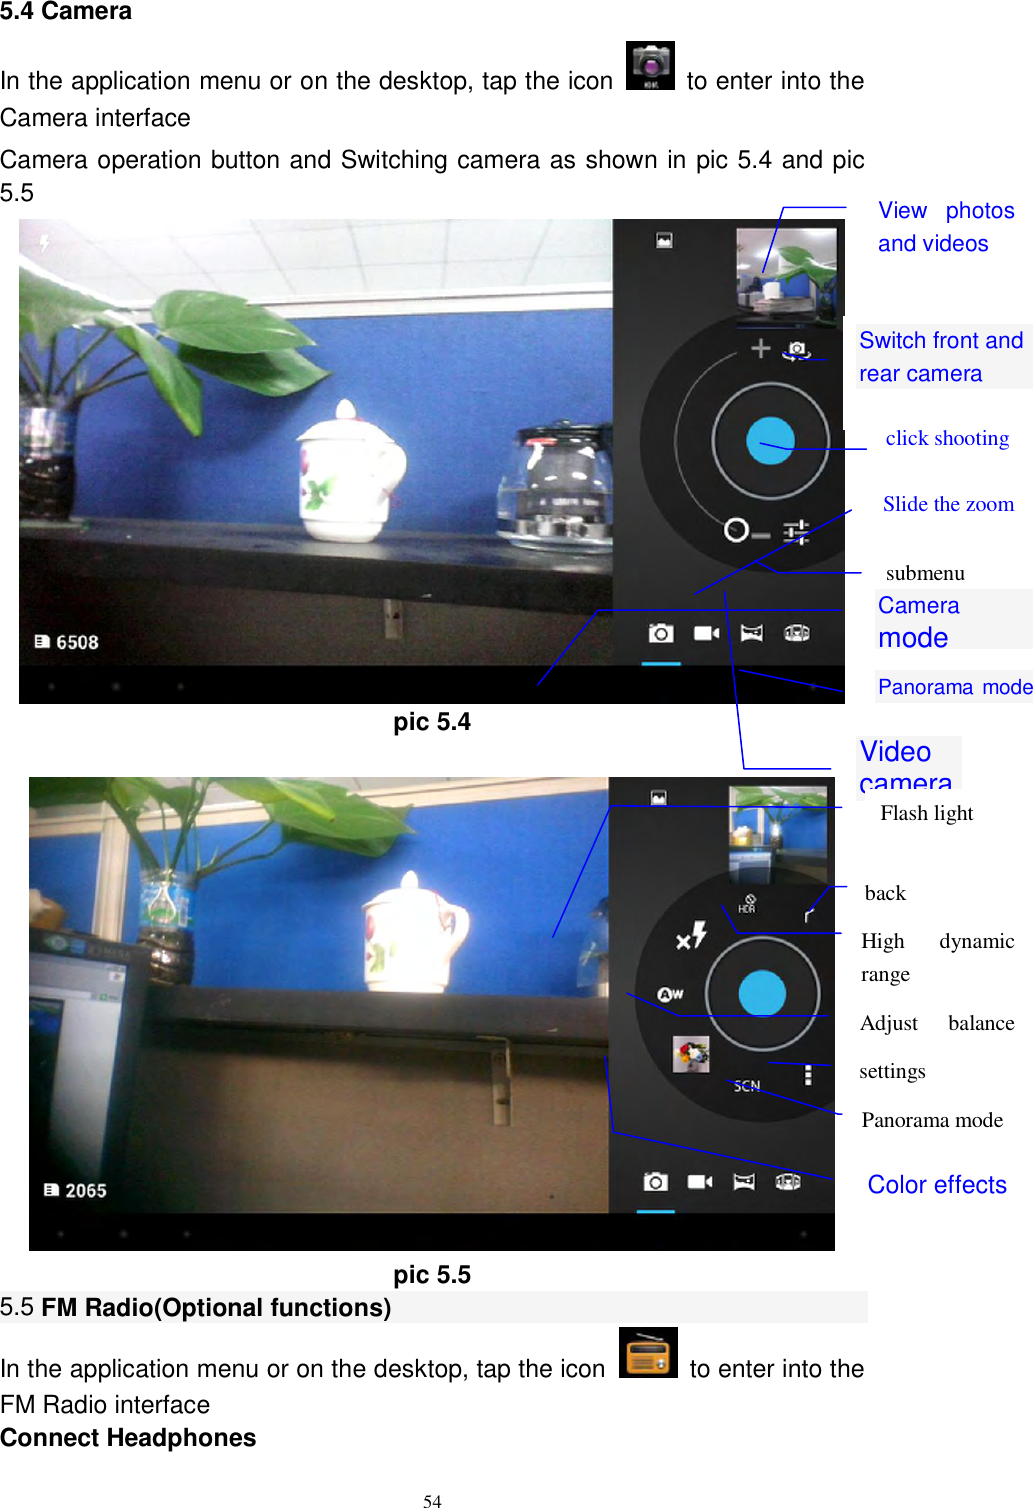      54 5.4 Camera In the application menu or on the desktop, tap the icon    to enter into the Camera interface Camera operation button and Switching camera as shown in pic 5.4 and pic 5.5  pic 5.4   pic 5.5 5.5 FM Radio(Optional functions) In the application menu or on the desktop, tap the icon    to enter into the FM Radio interface Connect Headphones Switch front and rear camera  click shooting  submenu  Panorama mode  Video camera  Camera mode  View  photos and videos  Slide the zoom settings  Panorama mode  Color effects back  High  dynamic range  Flash light  Adjust  balance light 